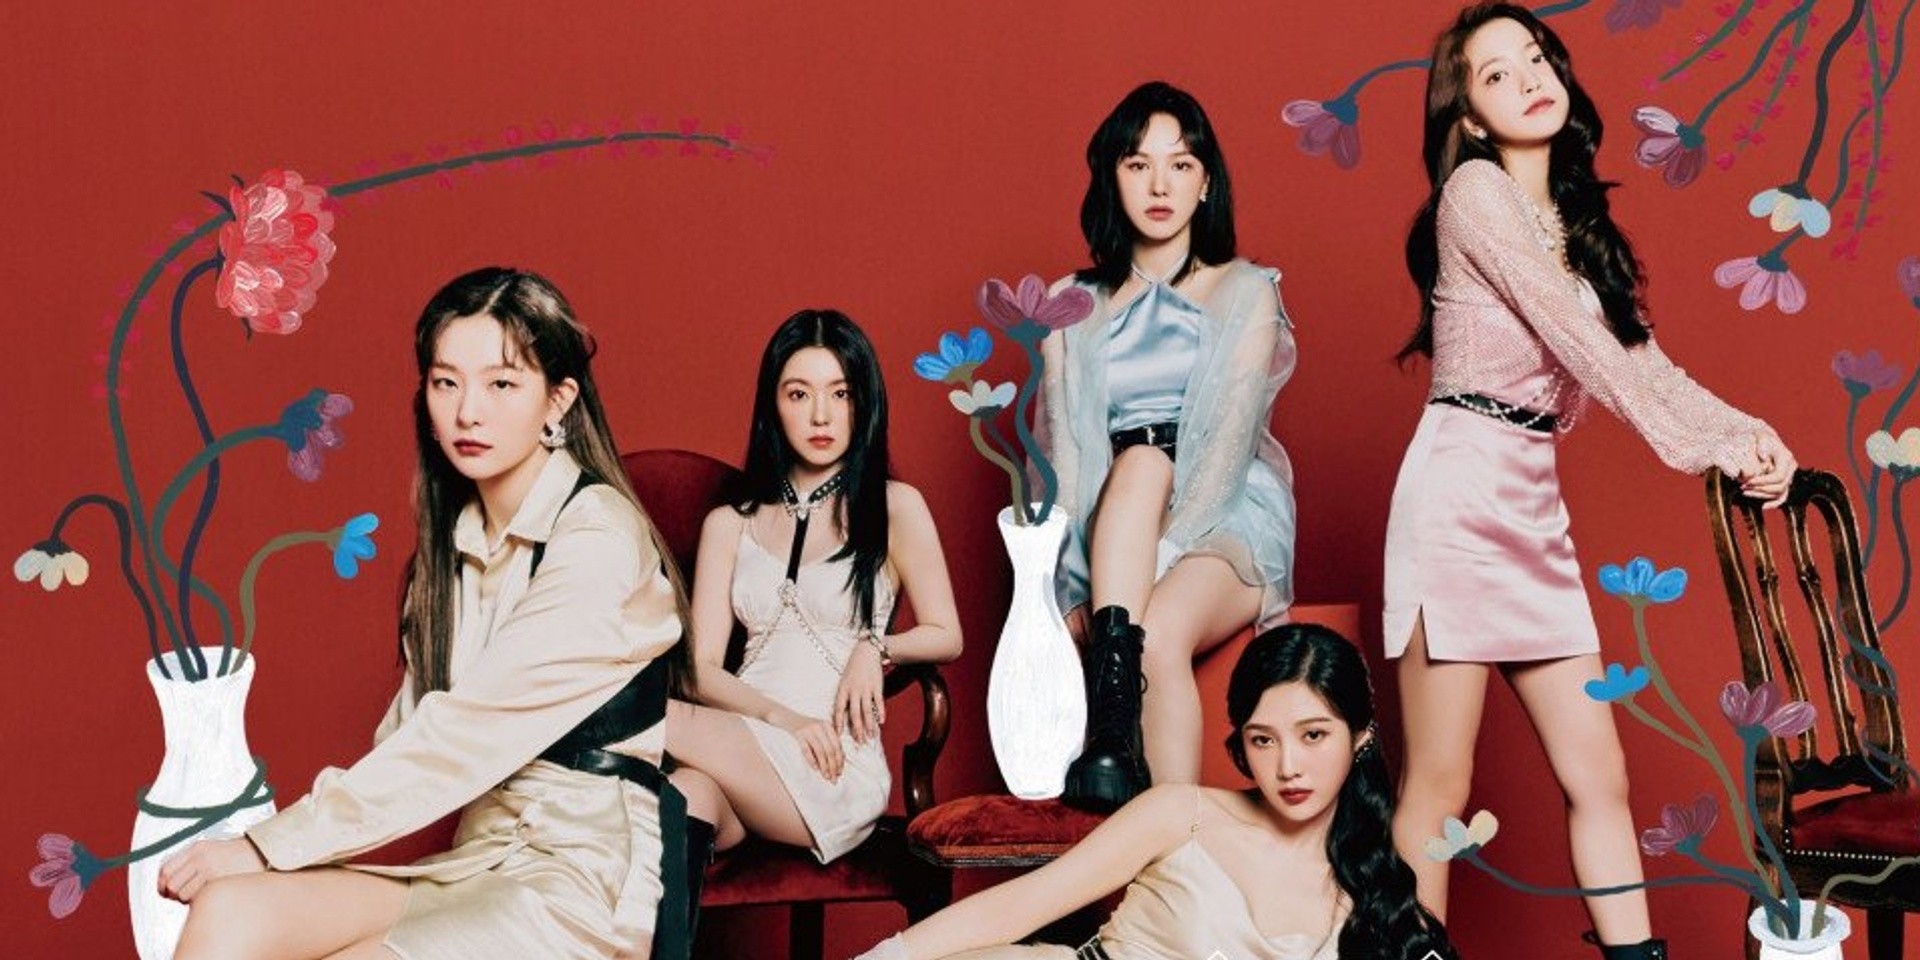 Red Velvet are in full 'Bloom' with their first Japanese album, here's what you need to know